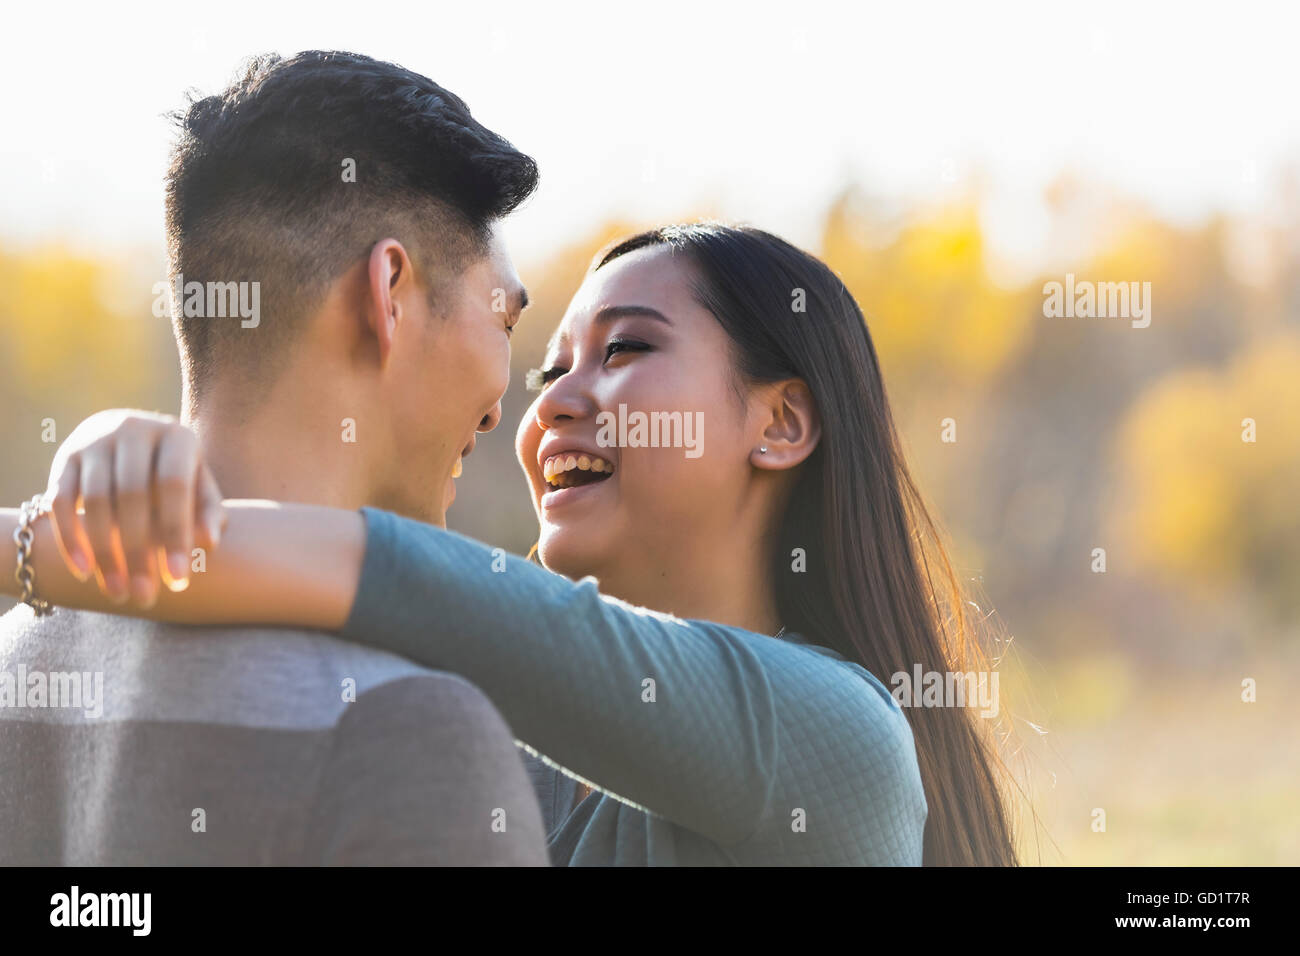 A Young Asian Couple Enjoying Quality Time Together Outdoors In A Park In Autumn And Embracing Each Other In The Warmth Of The Sunlight During The ... Stock Photo